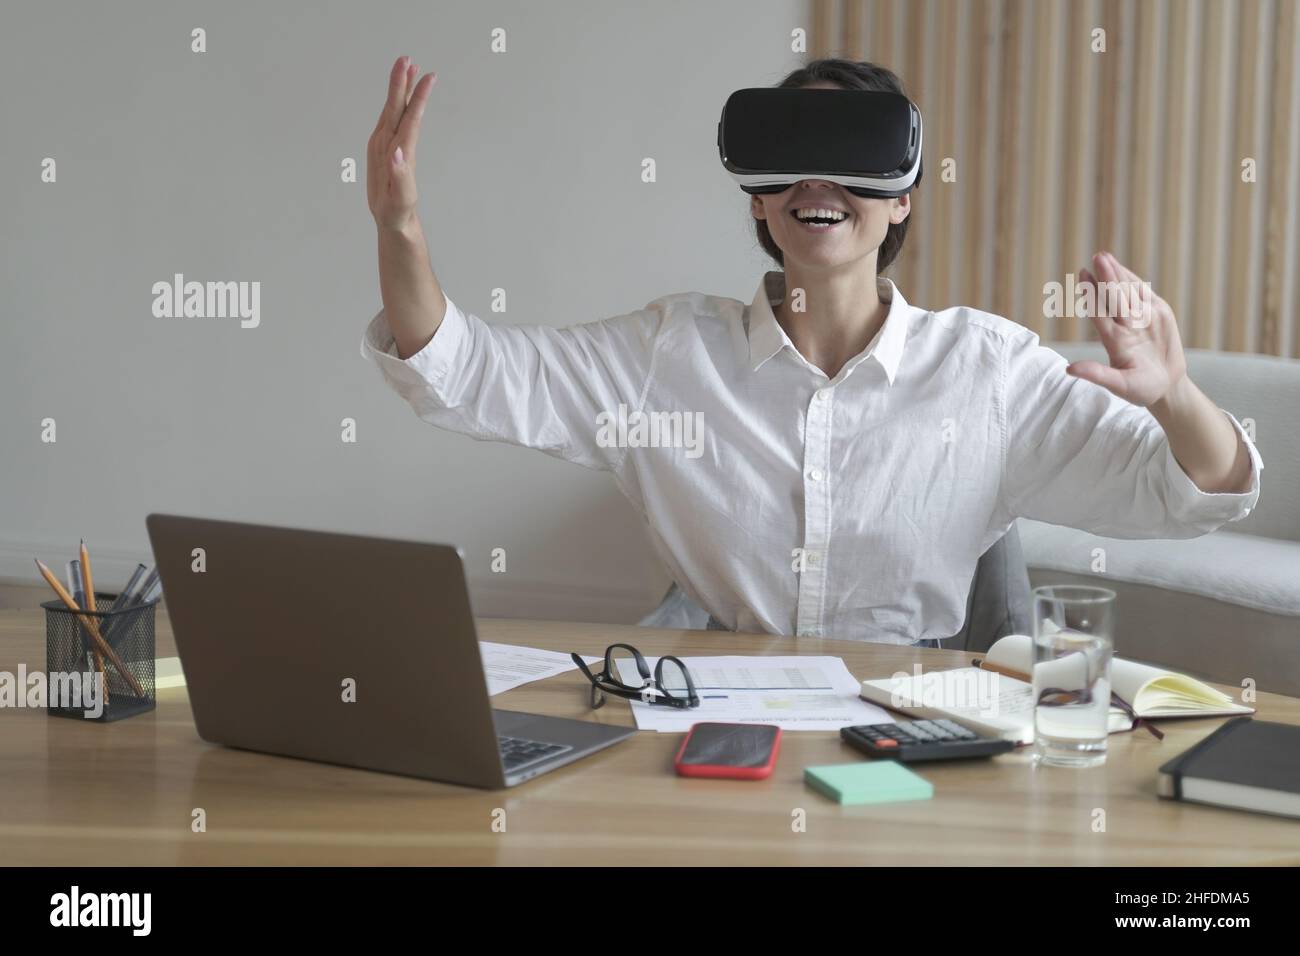 Joyful young business woman moving hands in air while using virtual reality glasses at workplace Stock Photo